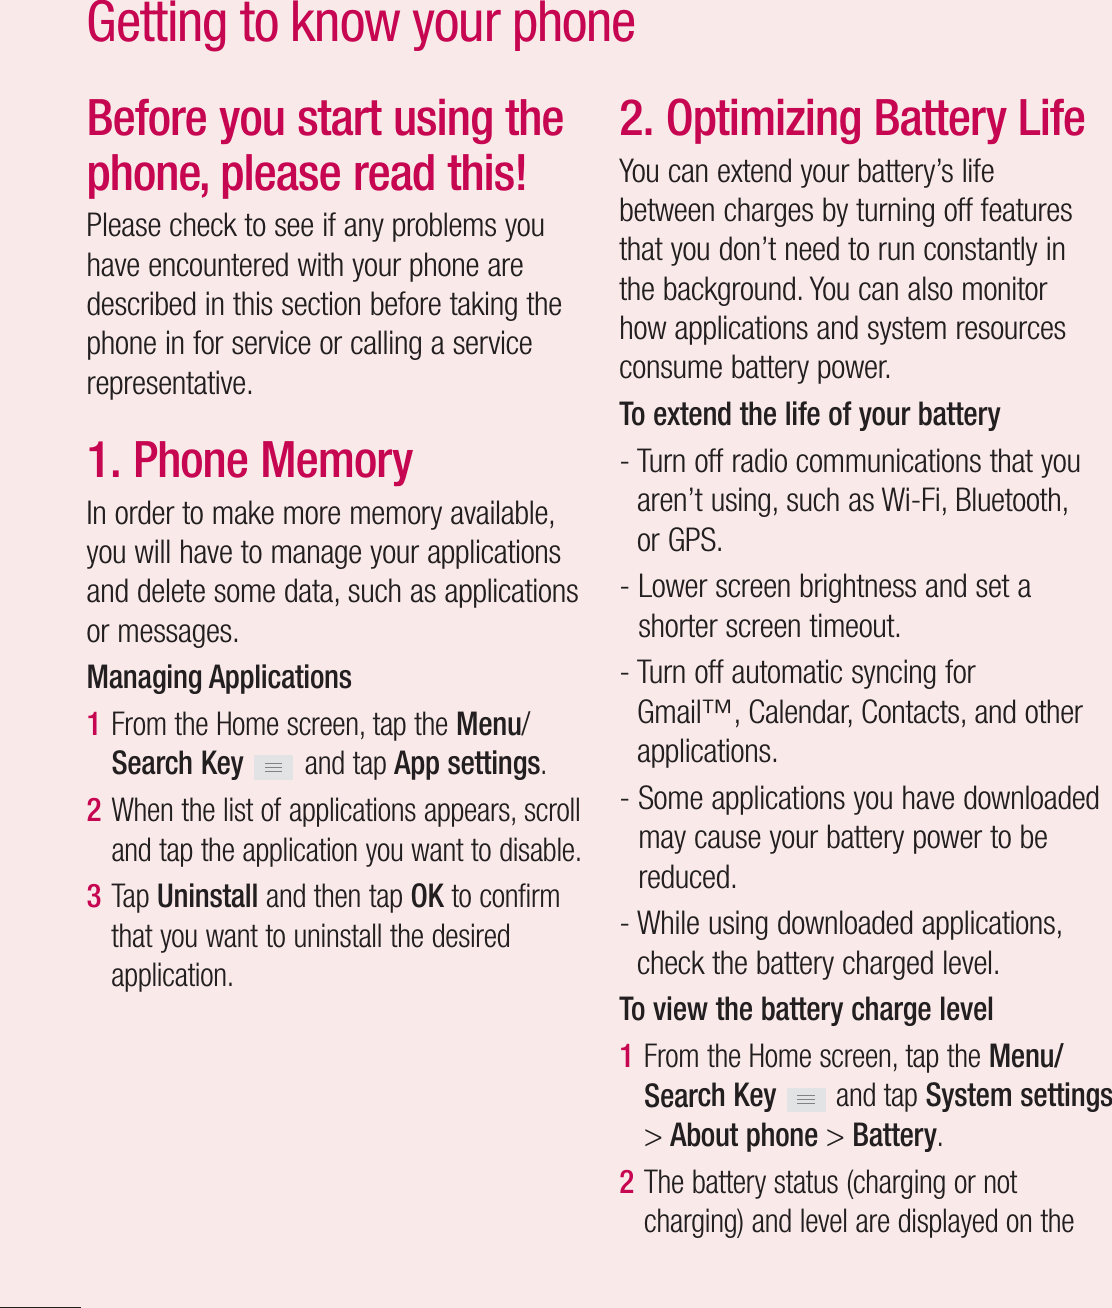 12Before you start using the phone, please read this!Please check to see if any problems you have encountered with your phone are described in this section before taking the phone in for service or calling a service representative.1. Phone MemoryIn order to make more memory available, you will have to manage your applications and delete some data, such as applications or messages.Managing Applications 1  From the Home screen, tap the Menu/Search Key   and tap App settings.2  When the list of applications appears, scroll and tap the application you want to disable.3  Tap Uninstall and then tap OK to confirm that you want to uninstall the desired application.2. Optimizing Battery LifeYou can extend your battery’s life between charges by turning off features that you don’t need to run constantly in the background. You can also monitor how applications and system resources consume battery power. To extend the life of your battery-  Turn off radio communications that you aren’t using, such as Wi-Fi, Bluetooth, or GPS. -  Lower screen brightness and set a shorter screen timeout.-  Turn off automatic syncing for Gmail™, Calendar, Contacts, and other applications.-  Some applications you have downloaded may cause your battery power to be reduced.-  While using downloaded applications, check the battery charged level.To view the battery charge level1  From the Home screen, tap the Menu/Search Key   and tap System settings &gt; About phone &gt; Battery.2  The battery status (charging or not charging) and level are displayed on the Getting to know your phone